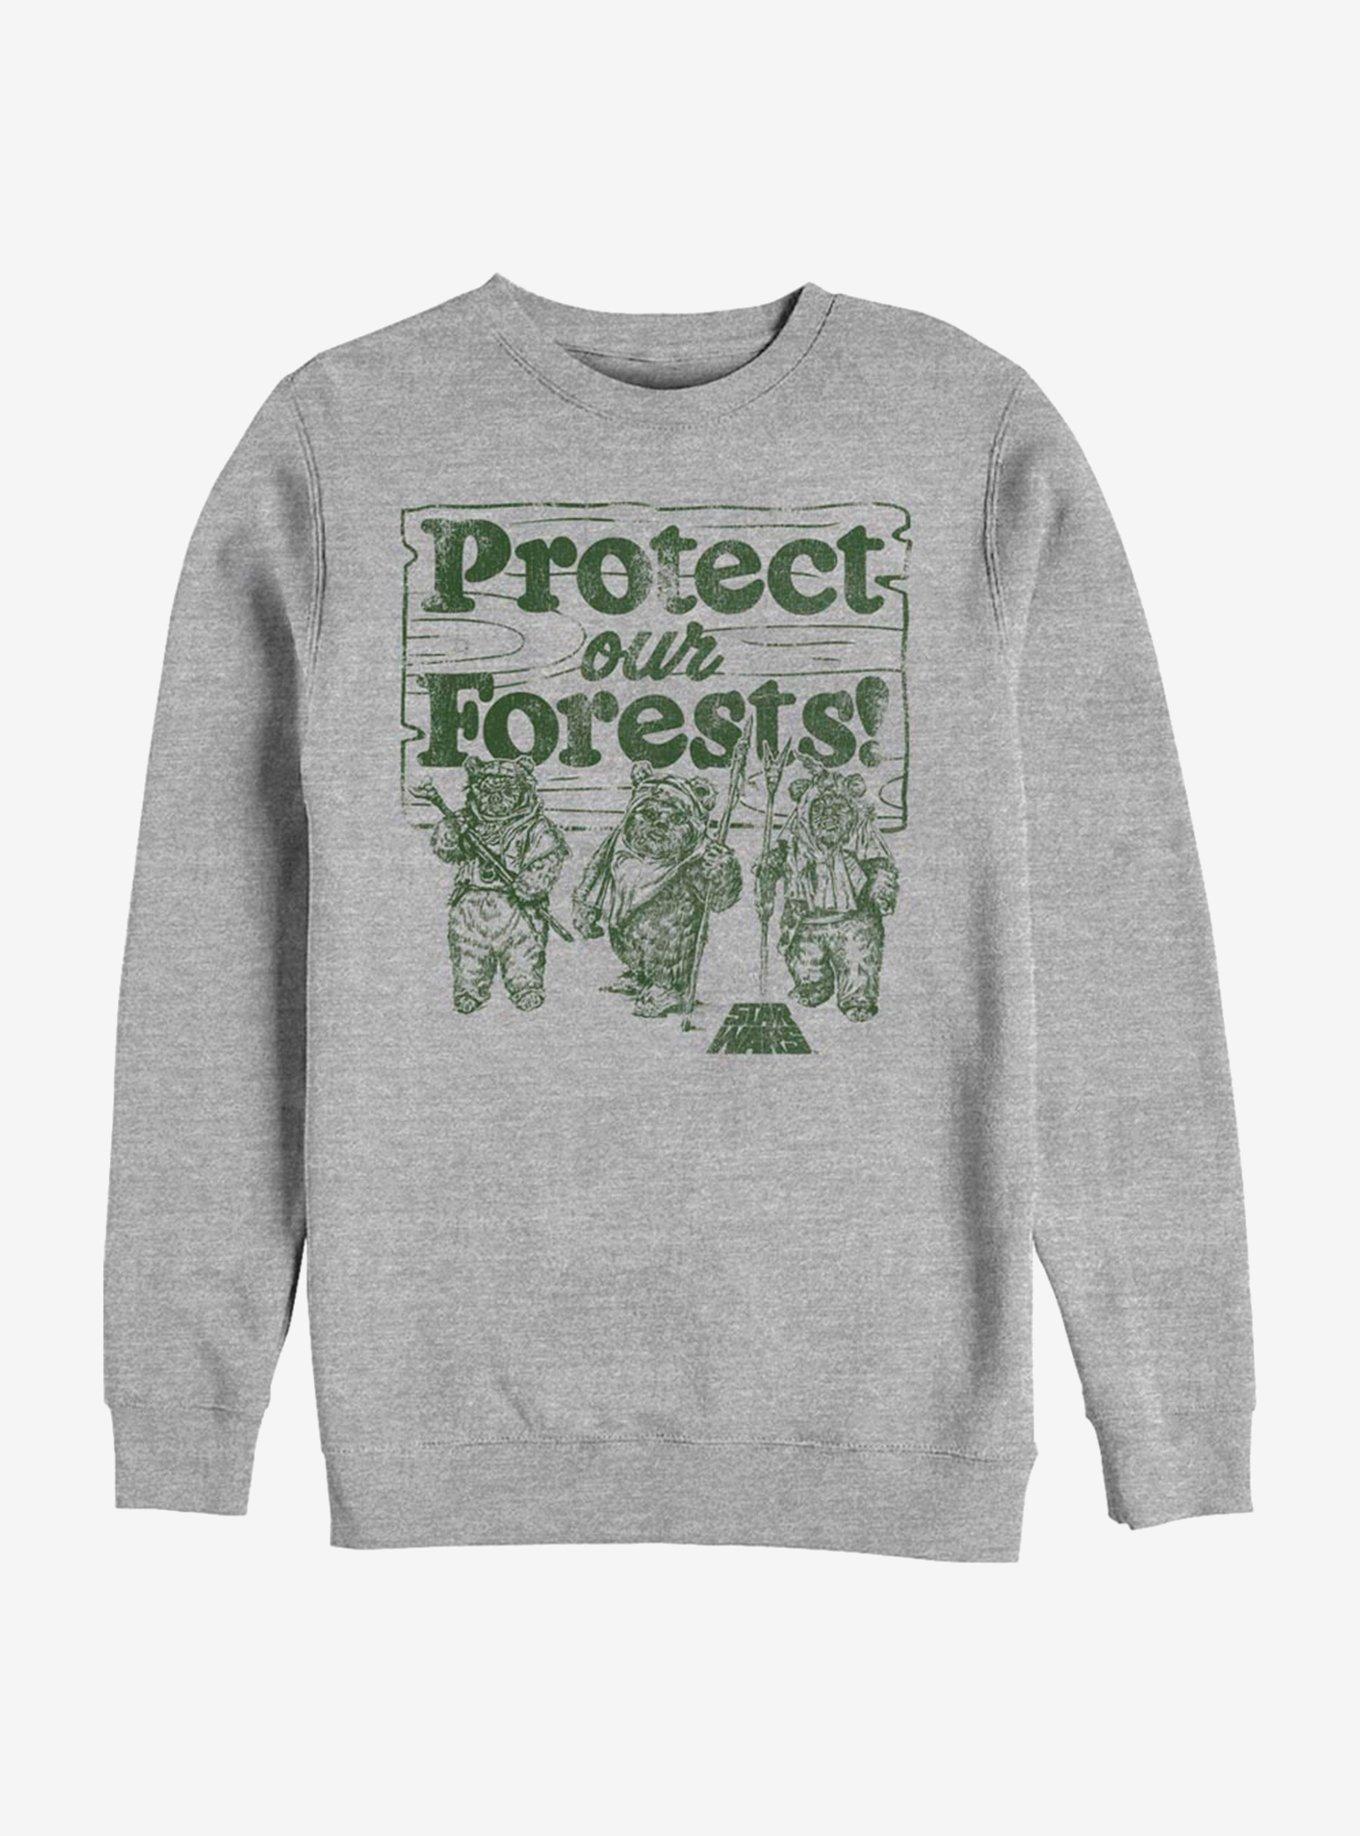 Star Wars Ewok Protect Our Forests Sweatshirt, ATH HTR, hi-res